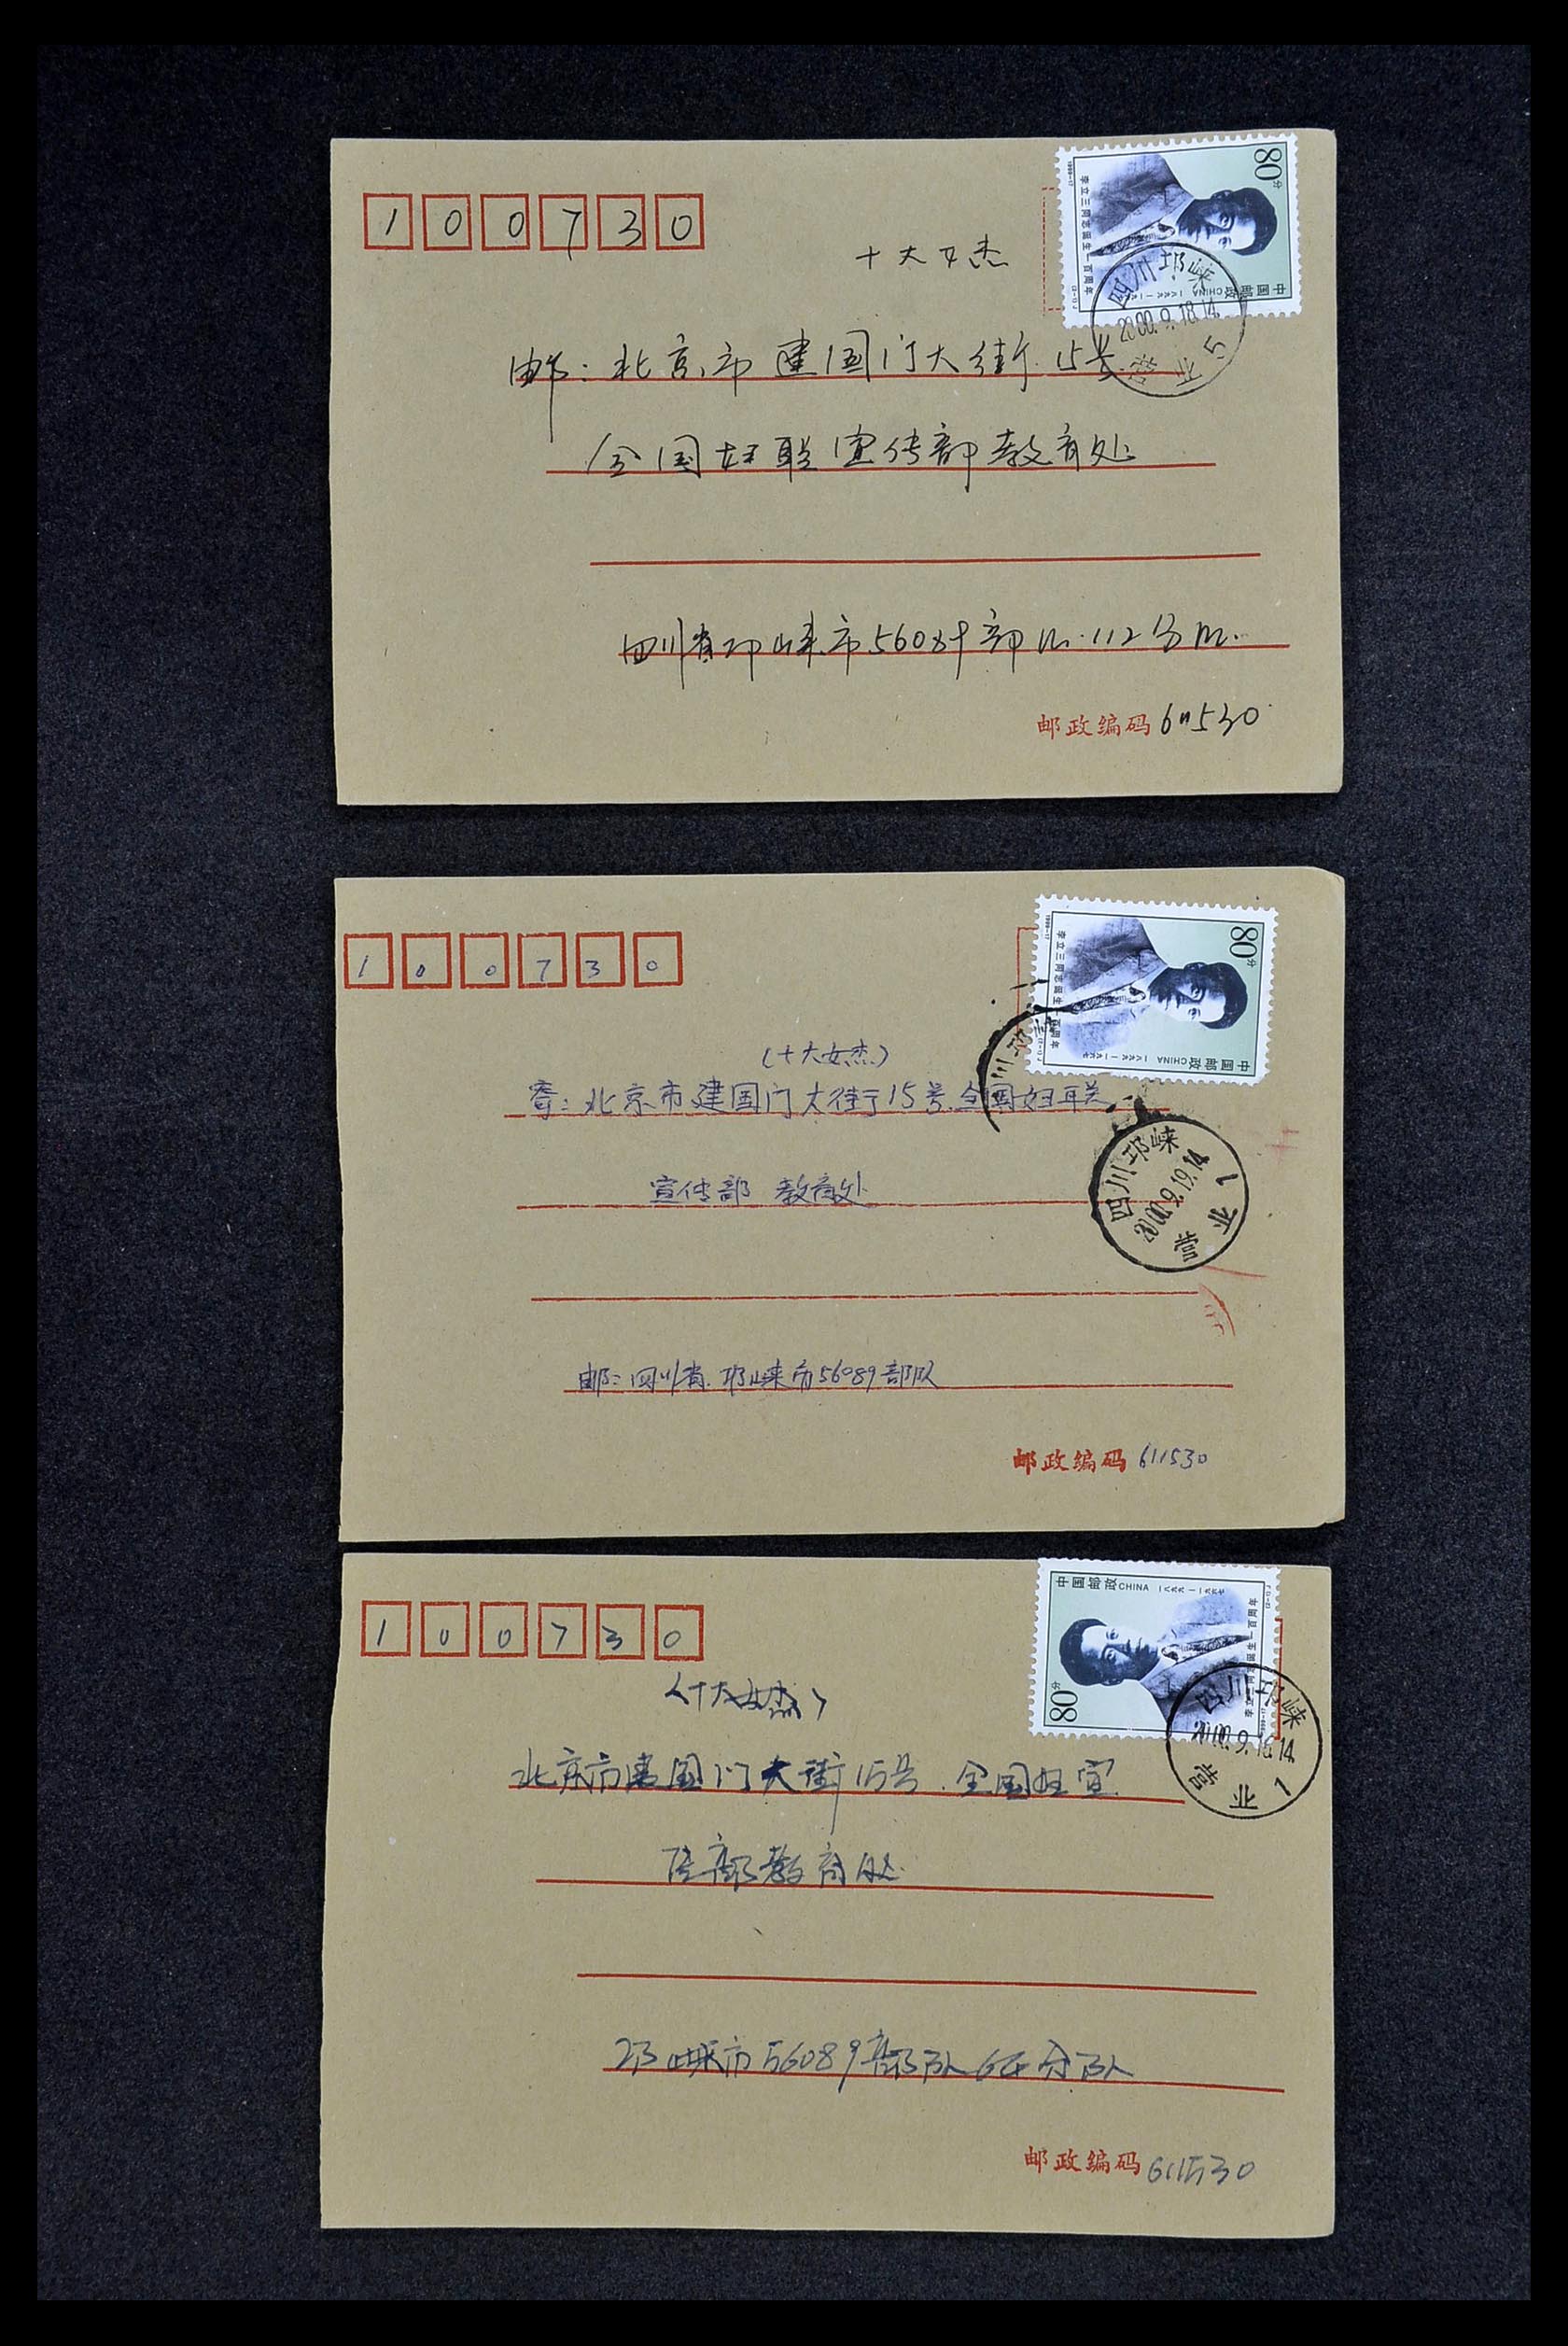 34402 059 - Stamp collection 34402 Taiwan covers 1960-2000.